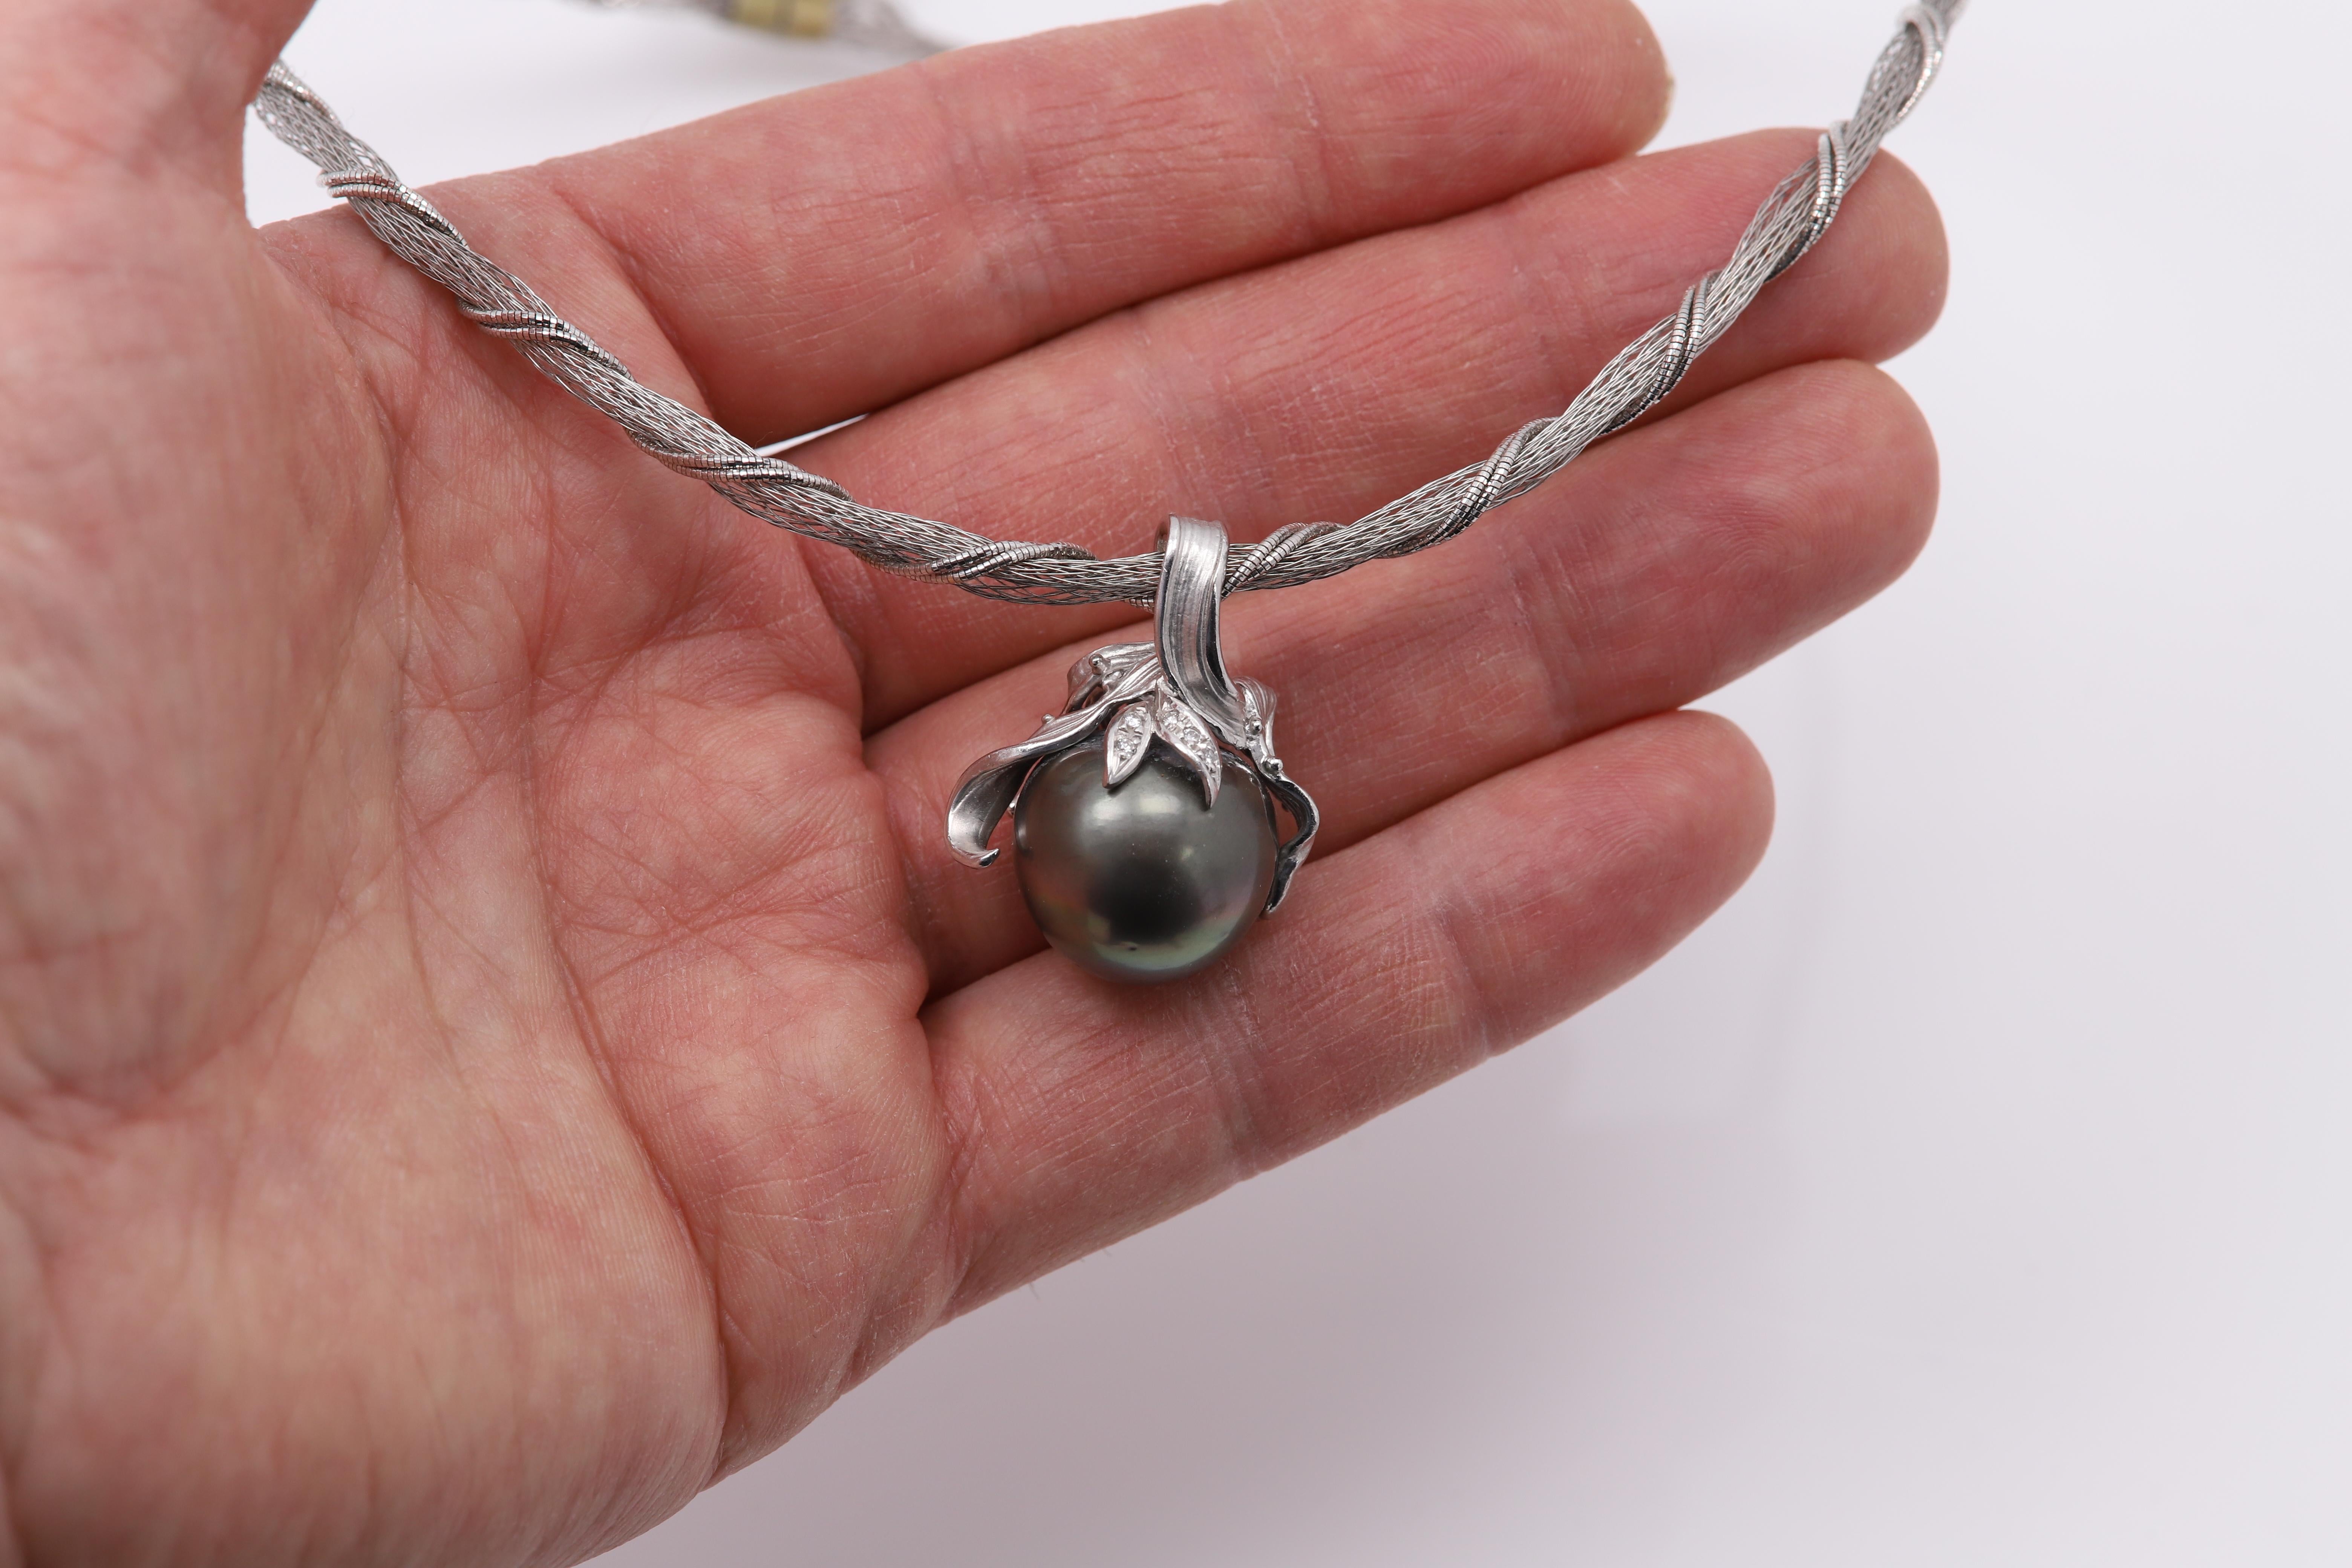 Impressive Necklace  with a very large Pearl pendant

Pearl size approx. 17mm
Grey South Sea Pearl
The pearl is set in Platinum 950 and can be removed from the chain/necklace.
it is a stand alone pendant. this alone weighs approx. 17.0 grams
The